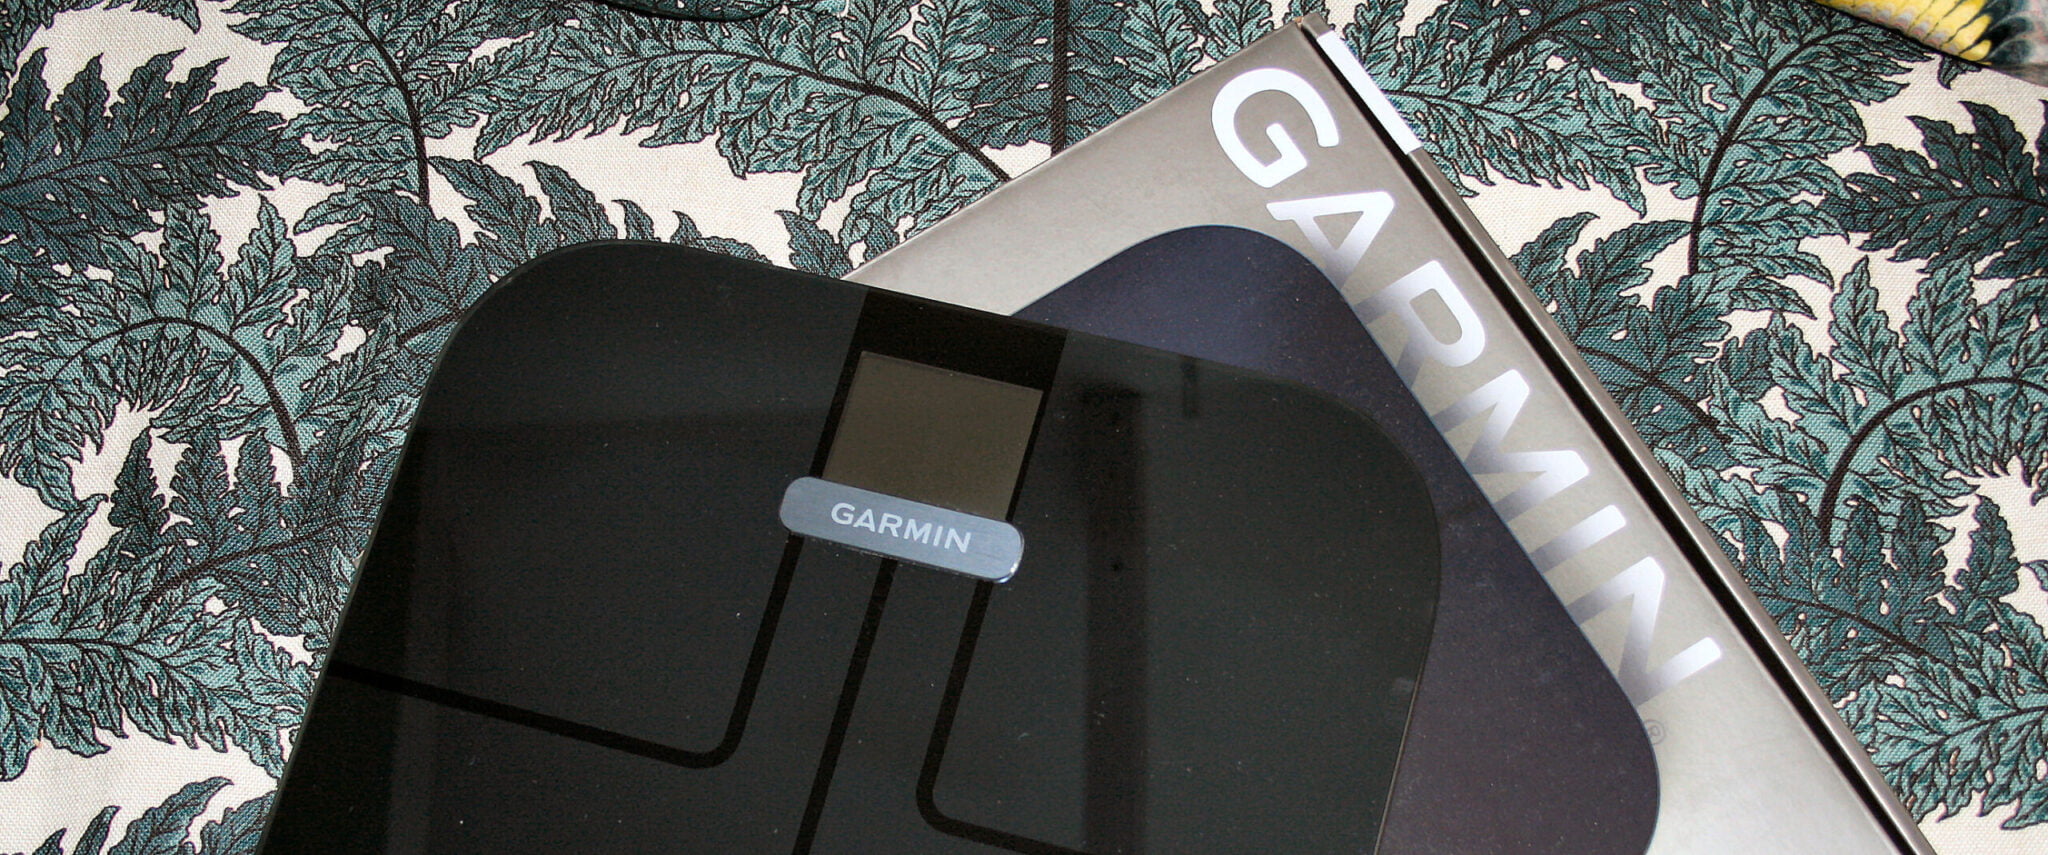 Garmin Index S2 Review  Smart Scale 2, WiFi Version 2021 Update